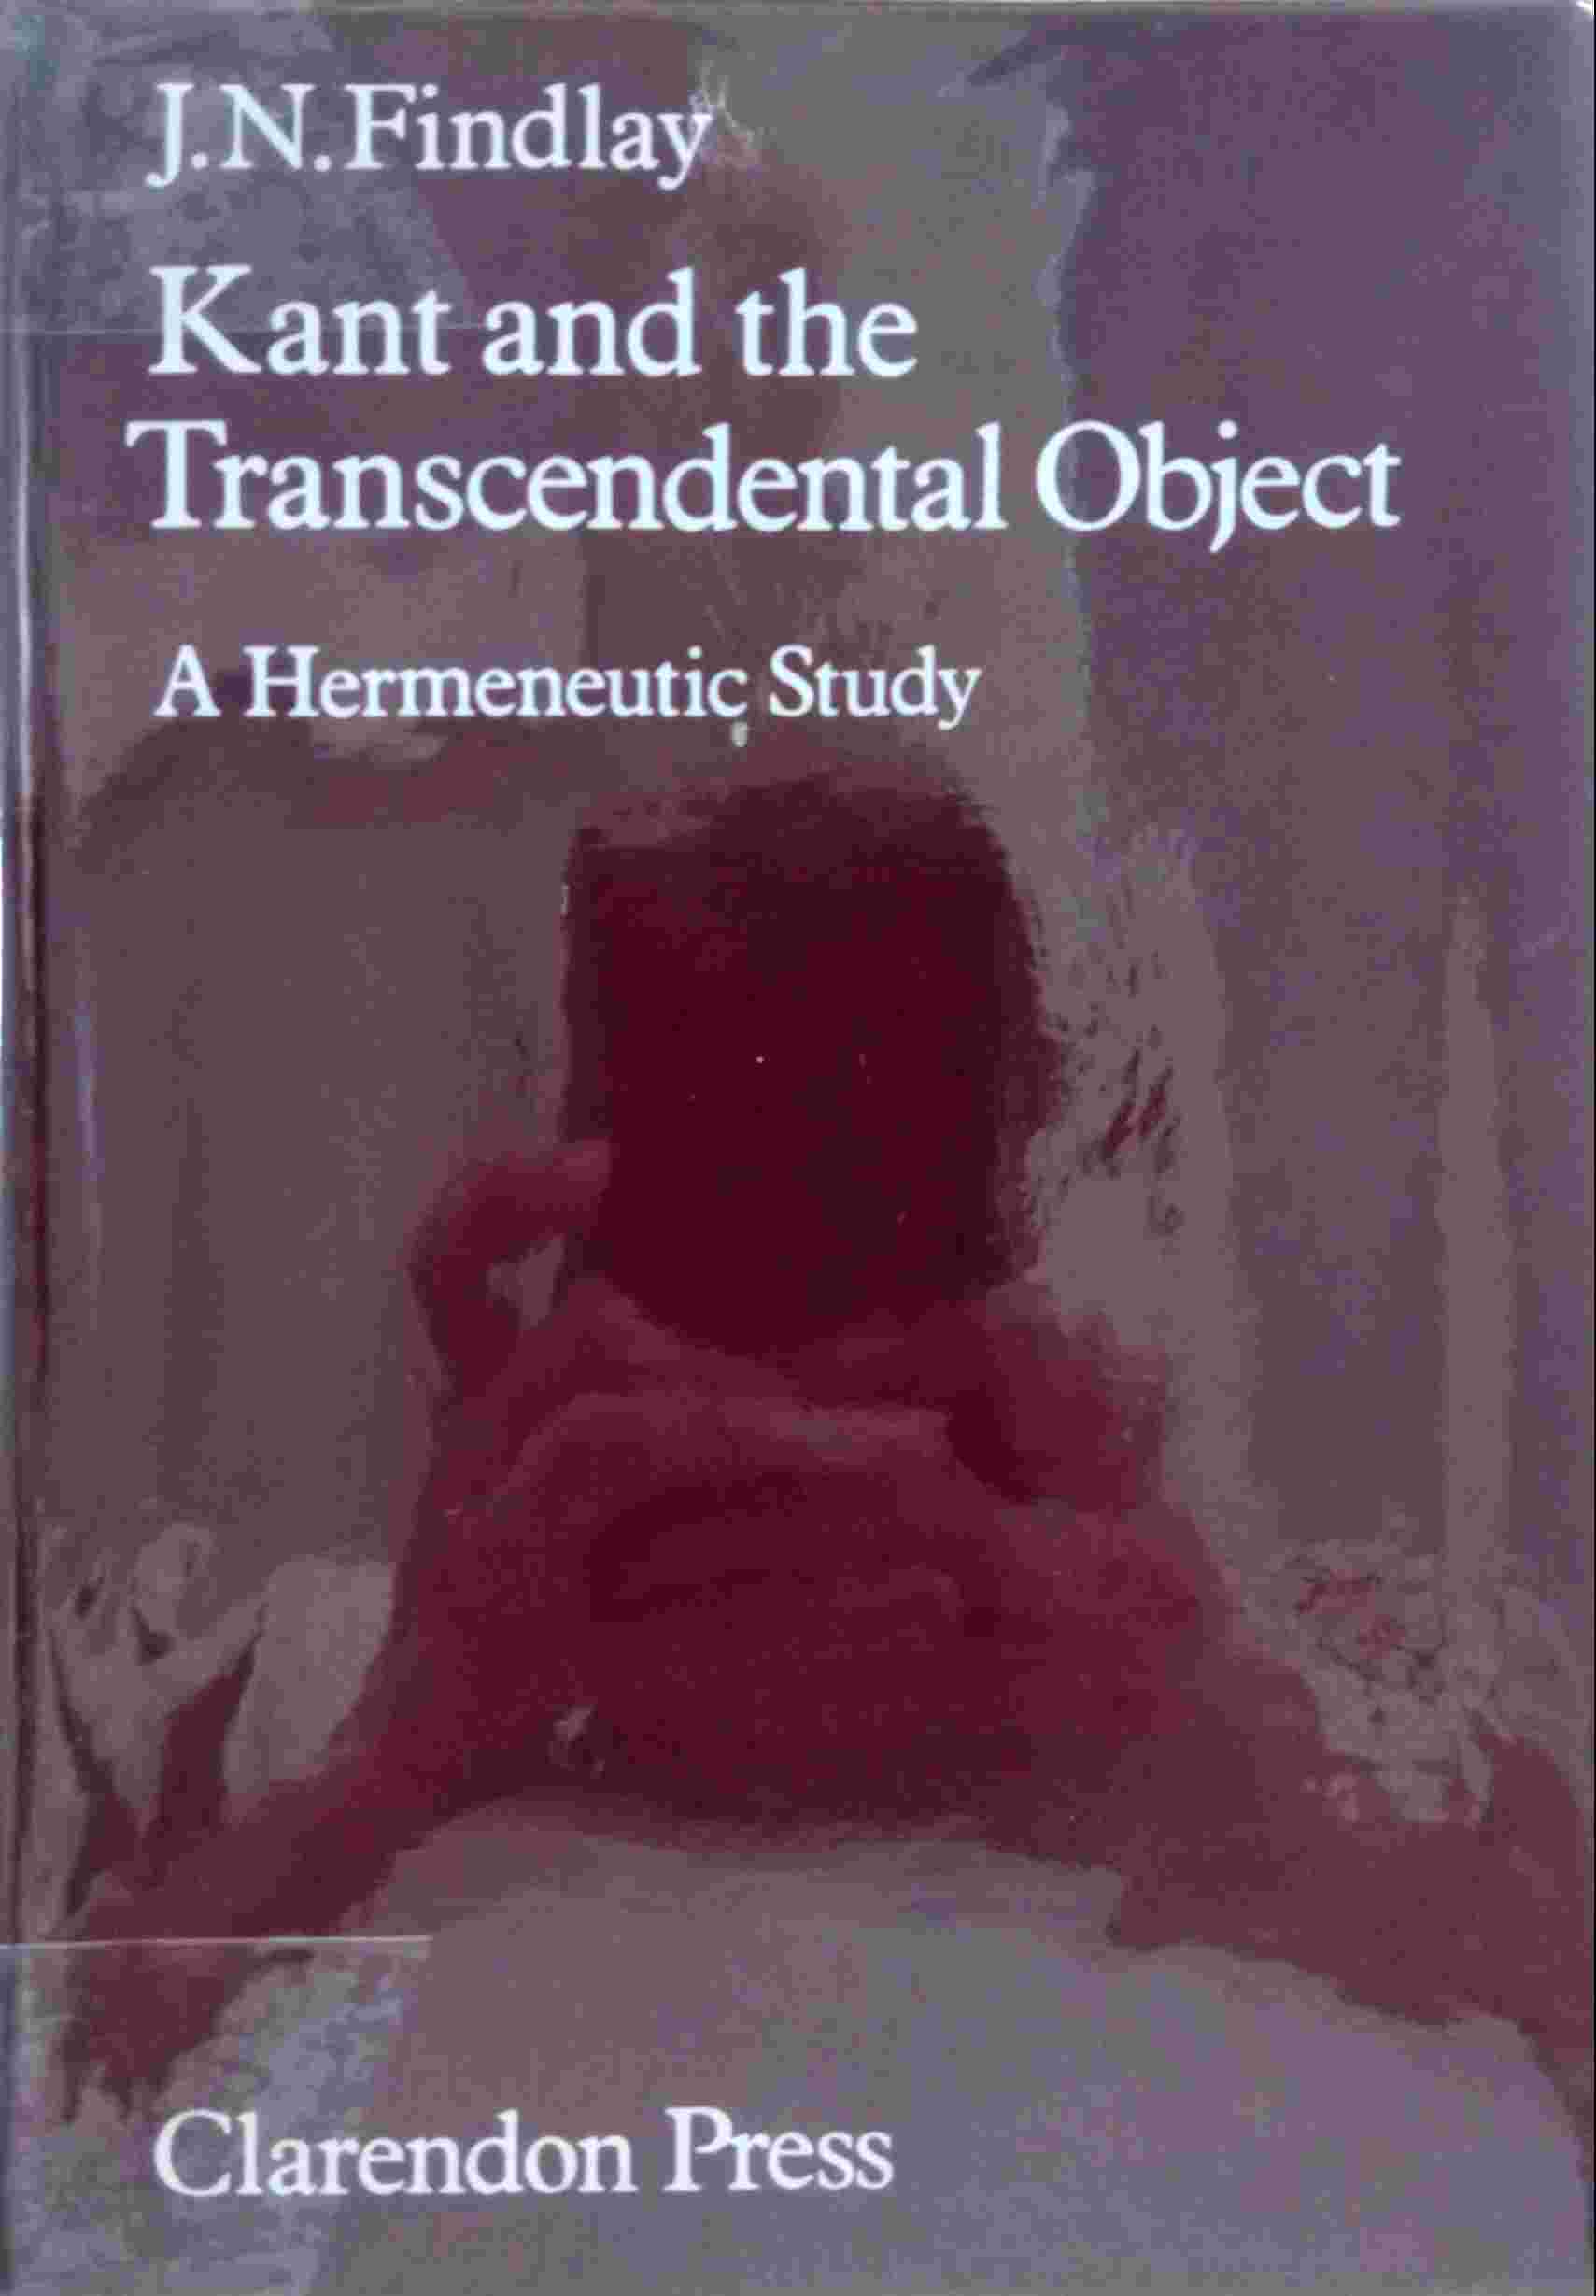 KANT AND THE TRANSCENDENTAL OBJECT: A HERMENEUTIC STUDY